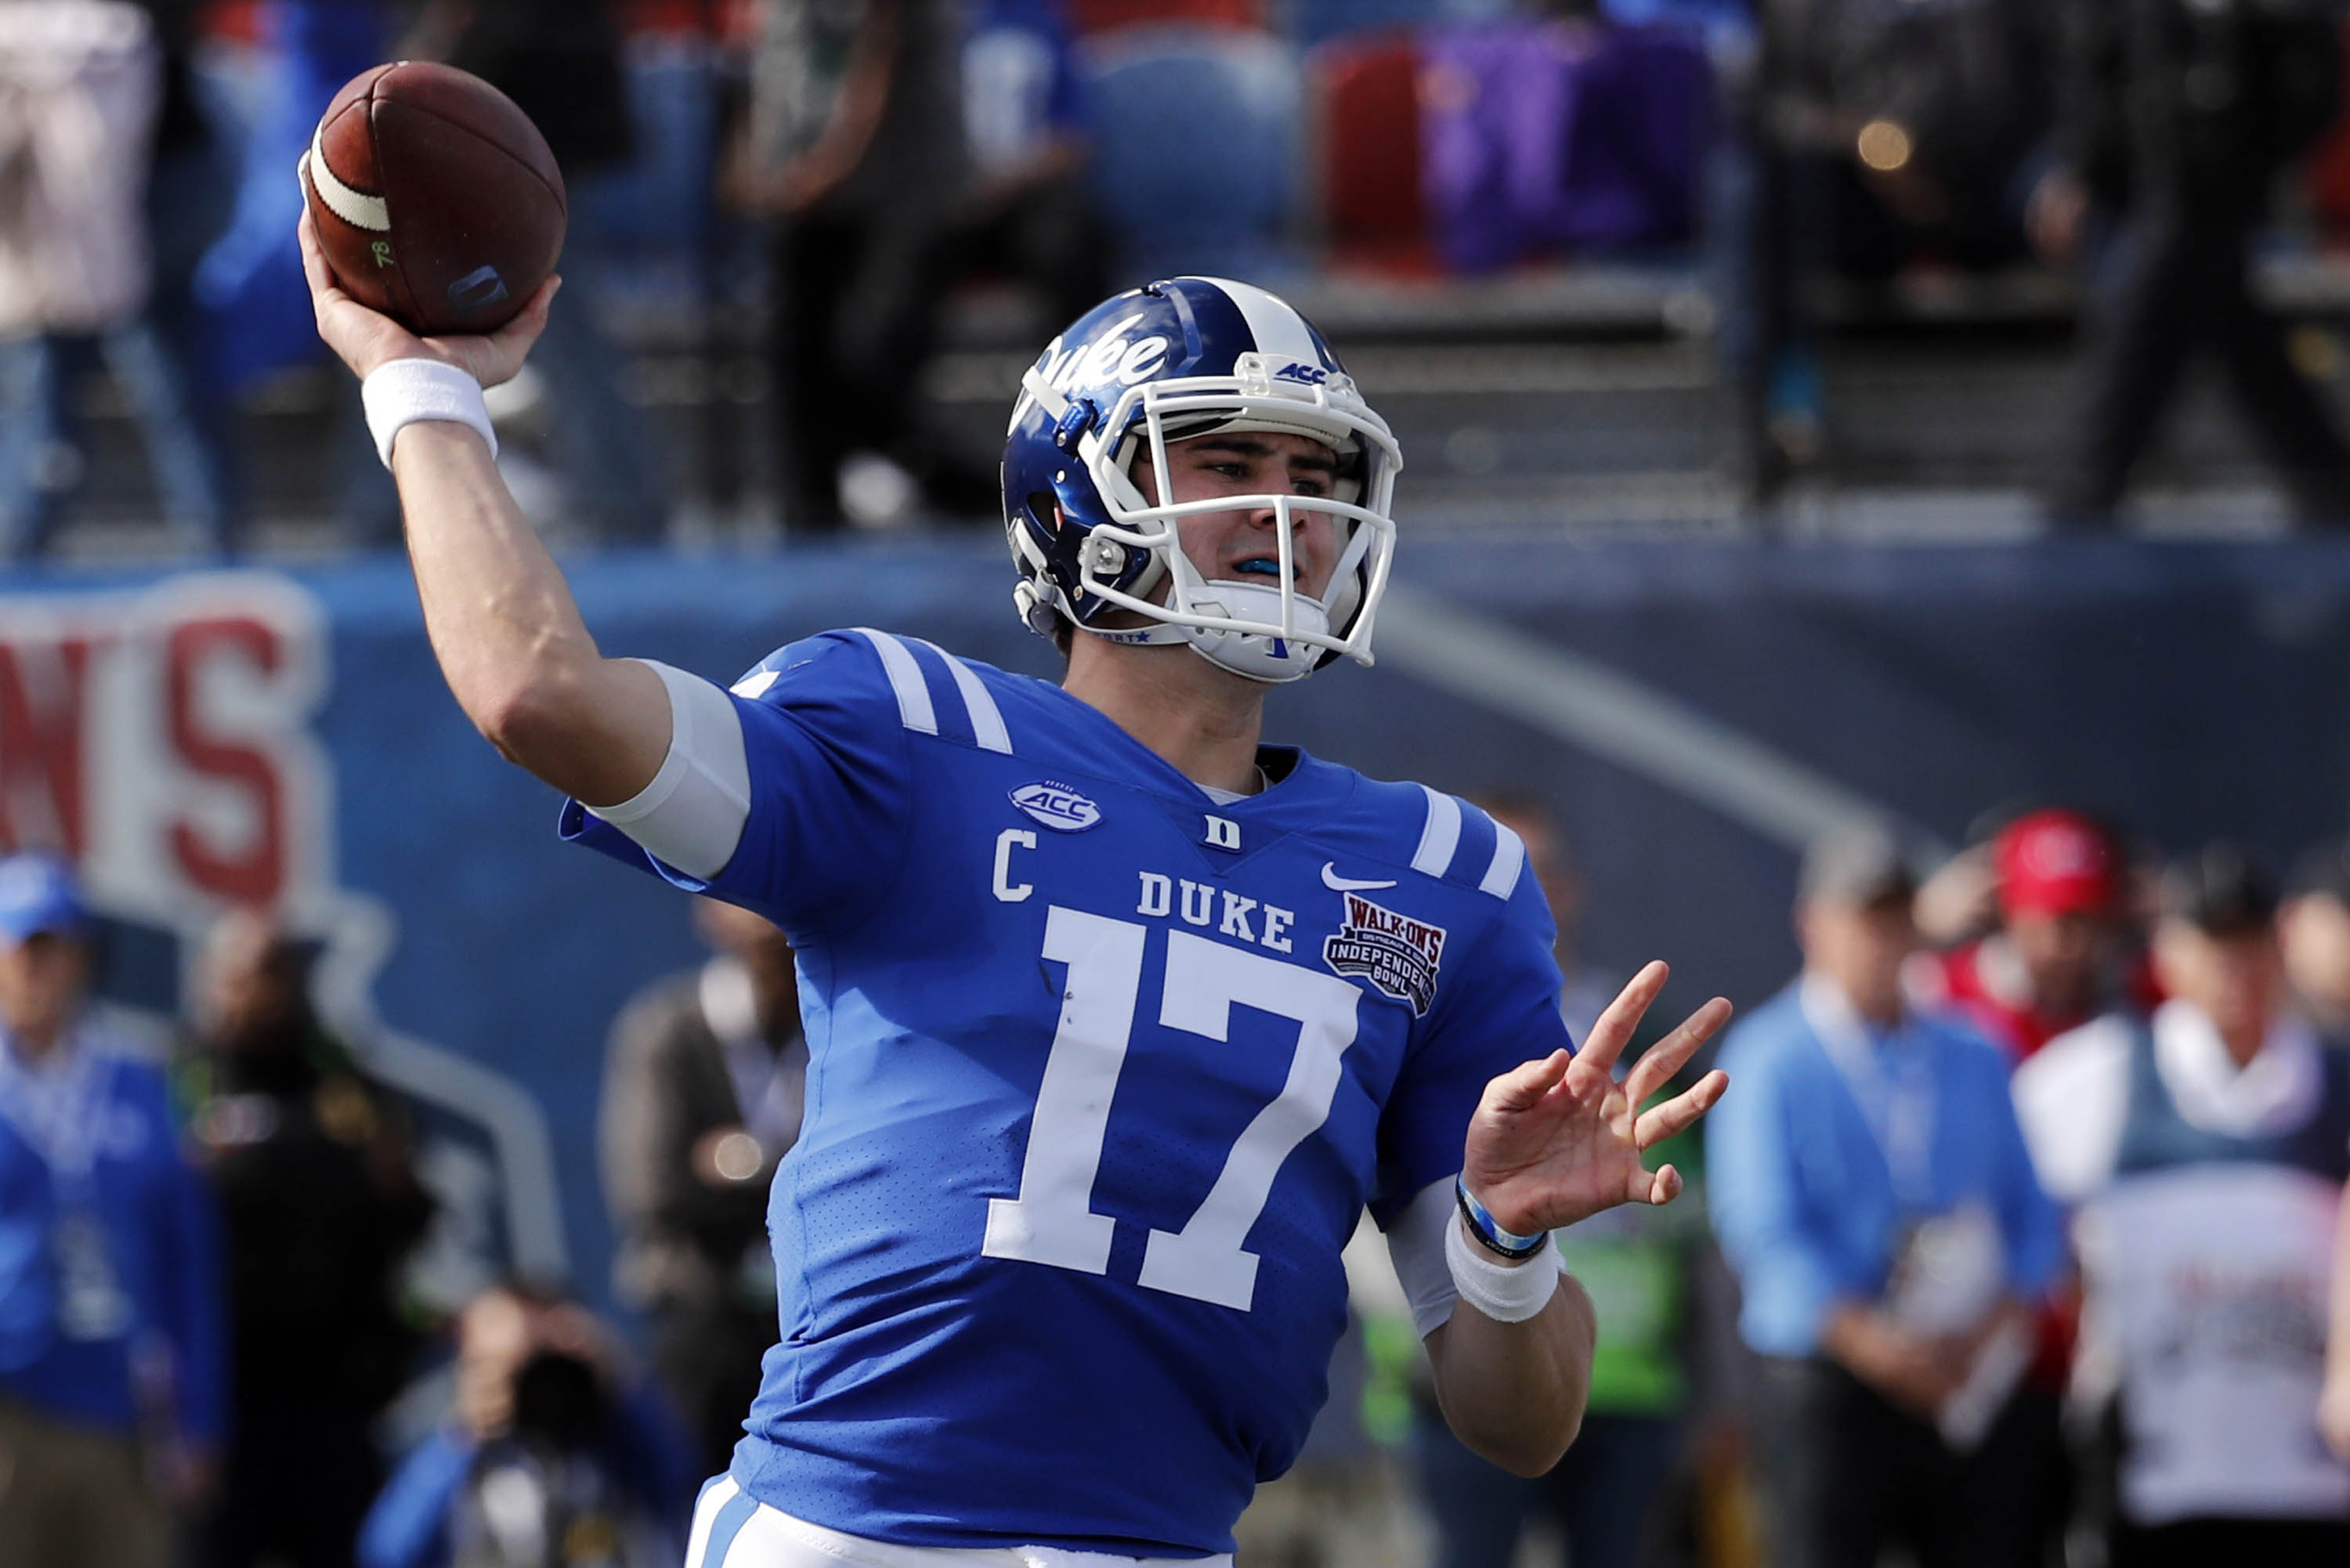 2019 NFL Draft: The Giants Really Took Daniel Jones at No. 6 - The